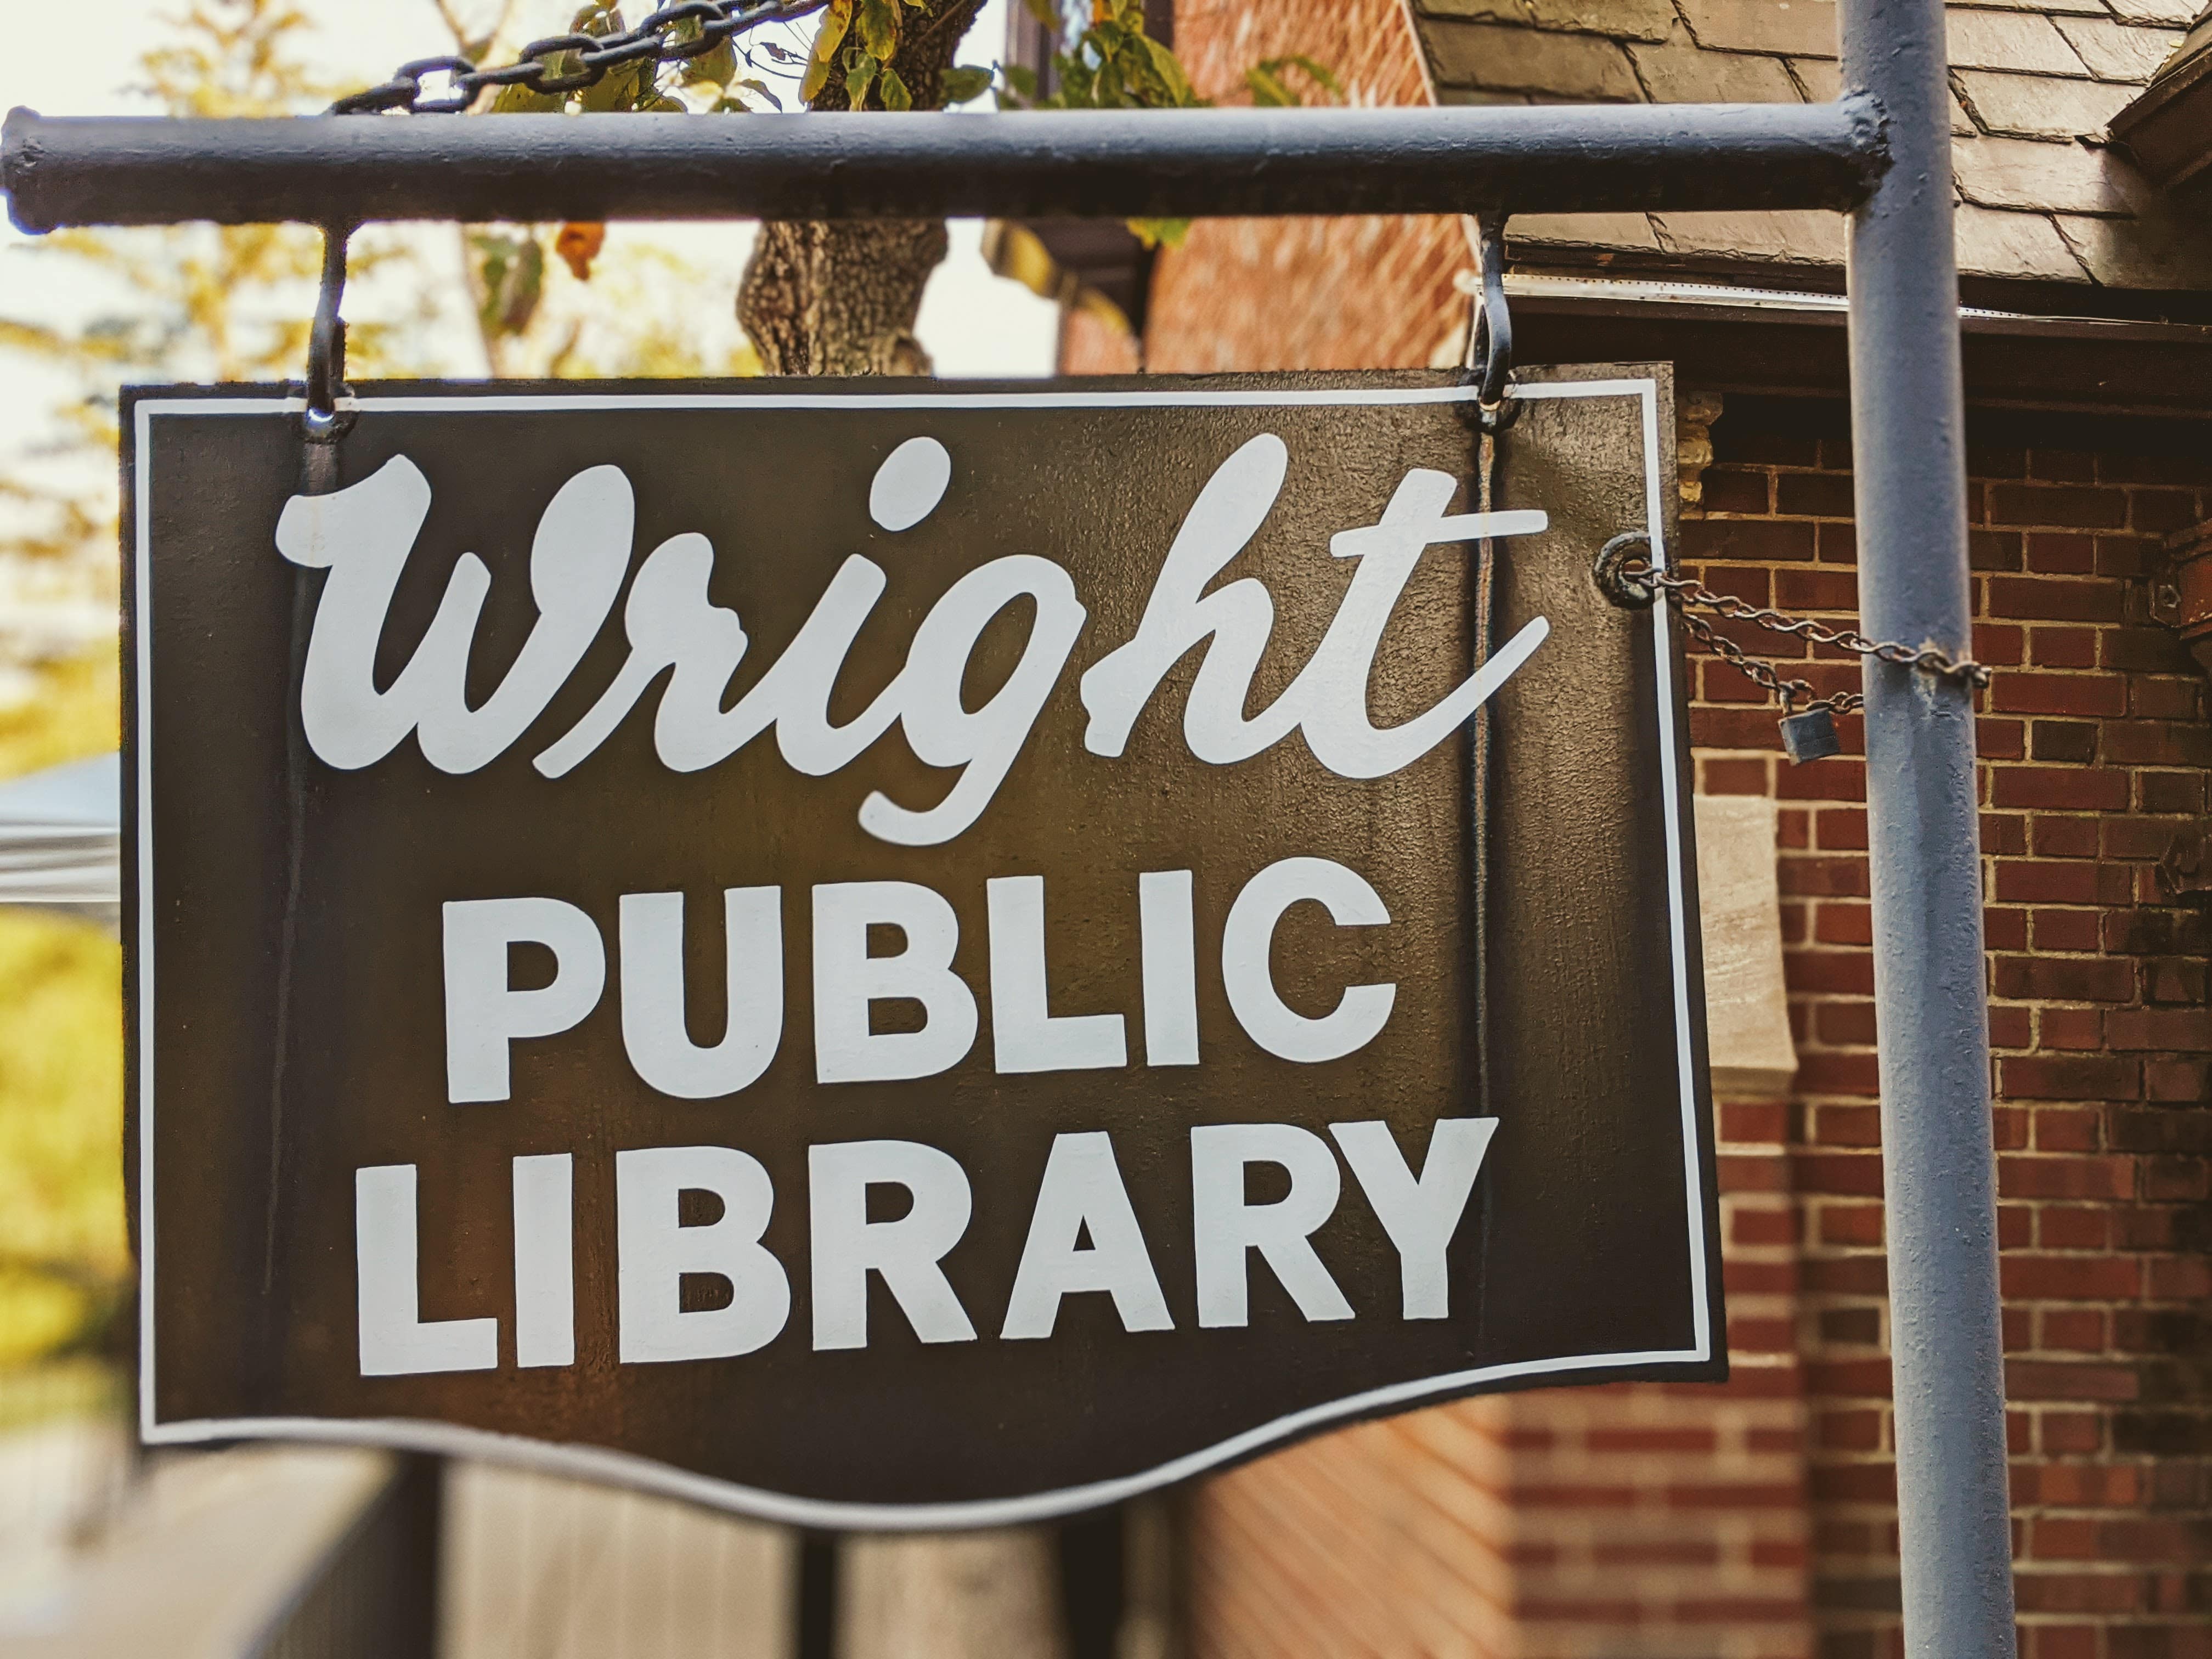 Black and white metal sign saying "wright public library"